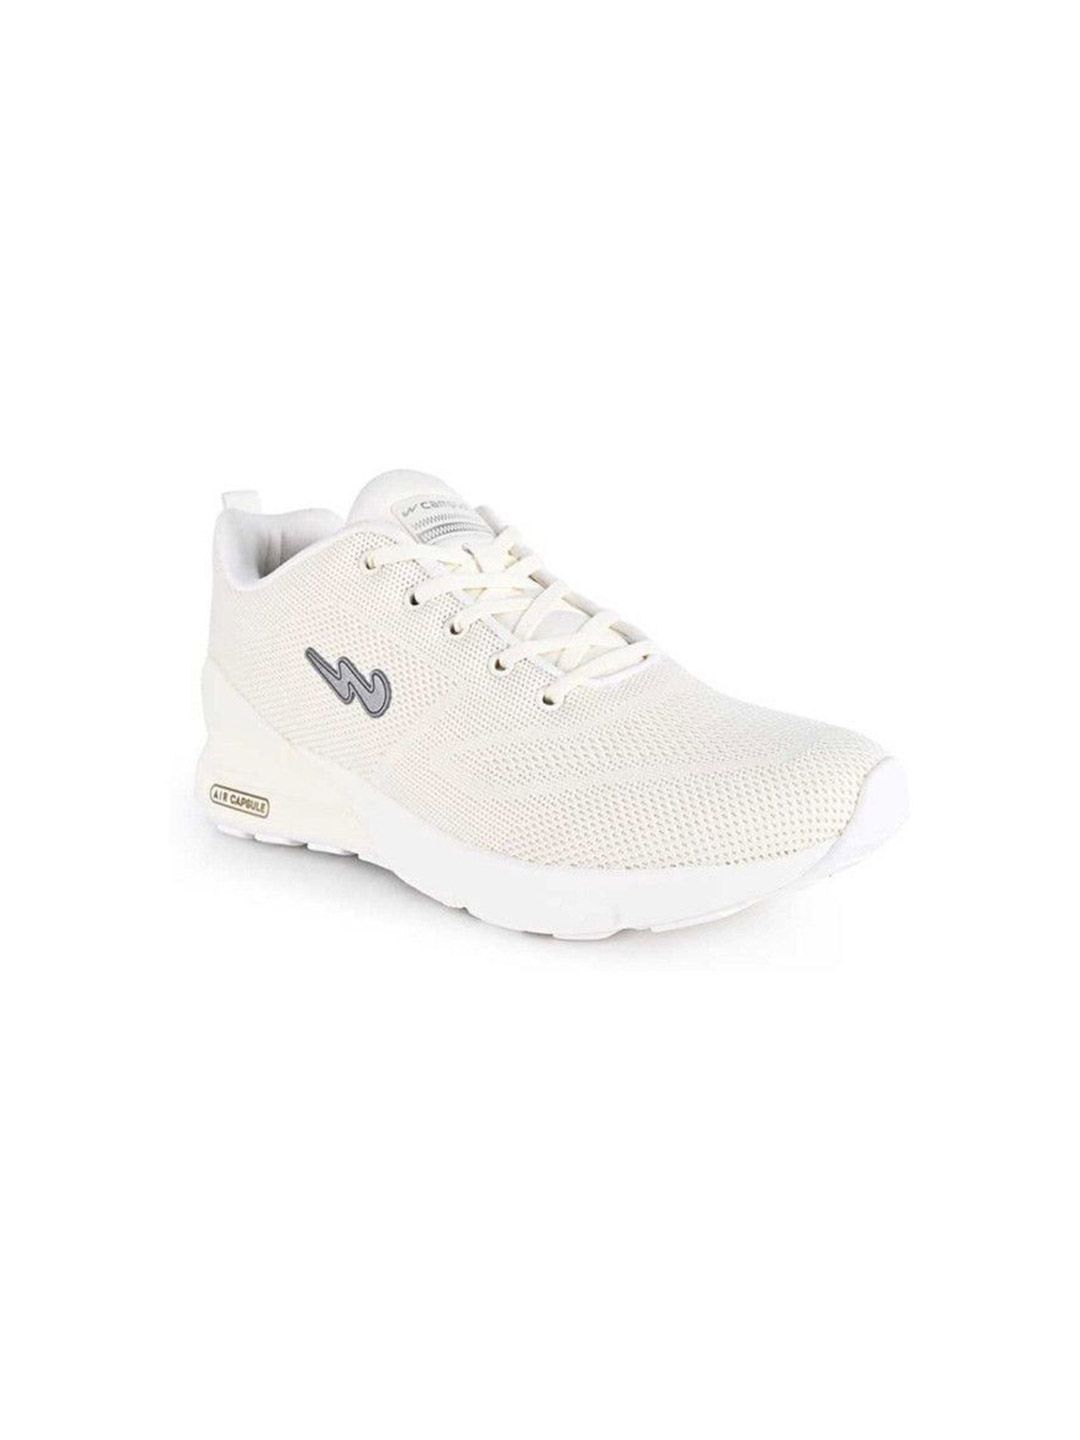 Buy Men North Plus Off White Running Shoes From Fancode Shop.